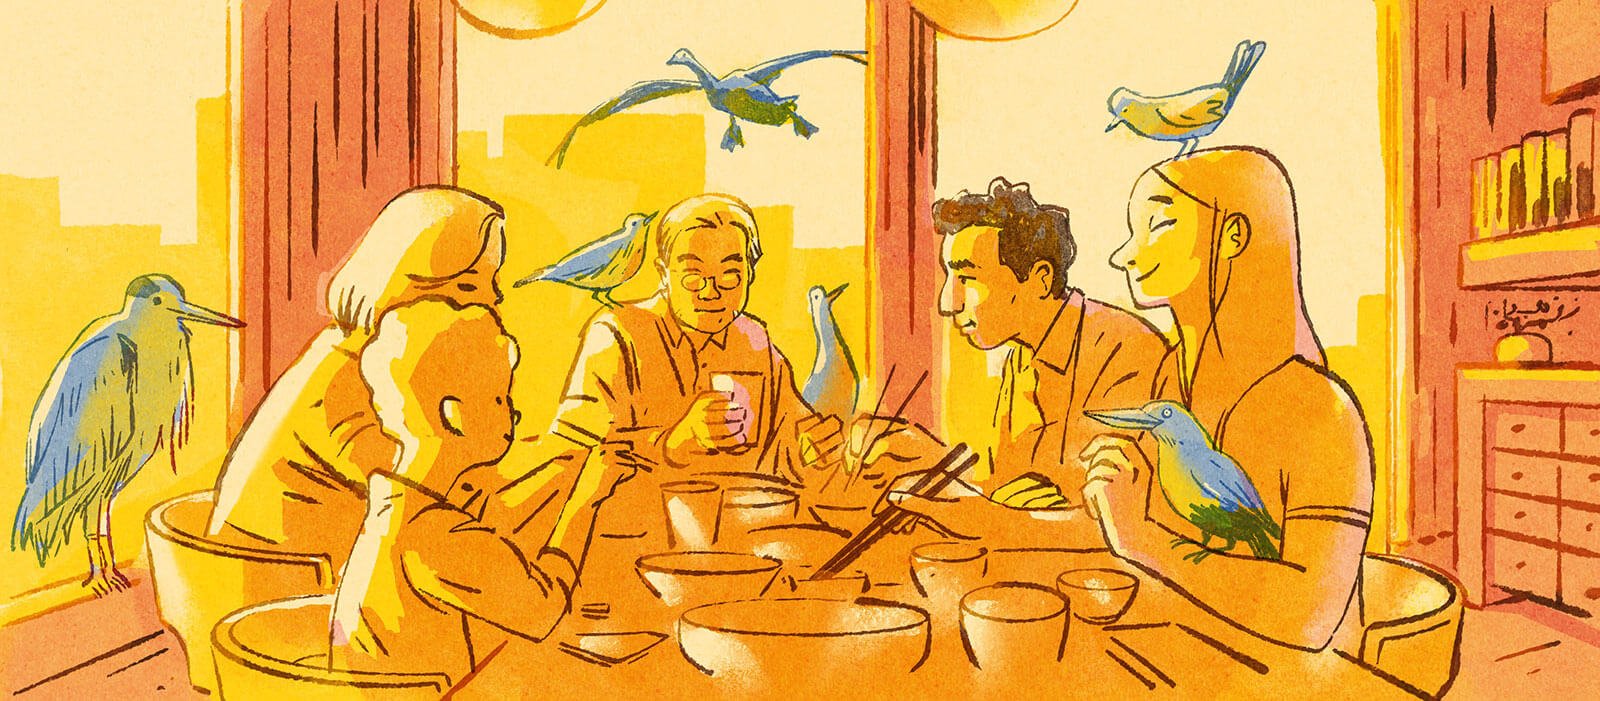 Five members of a multilingual family eating together at the table